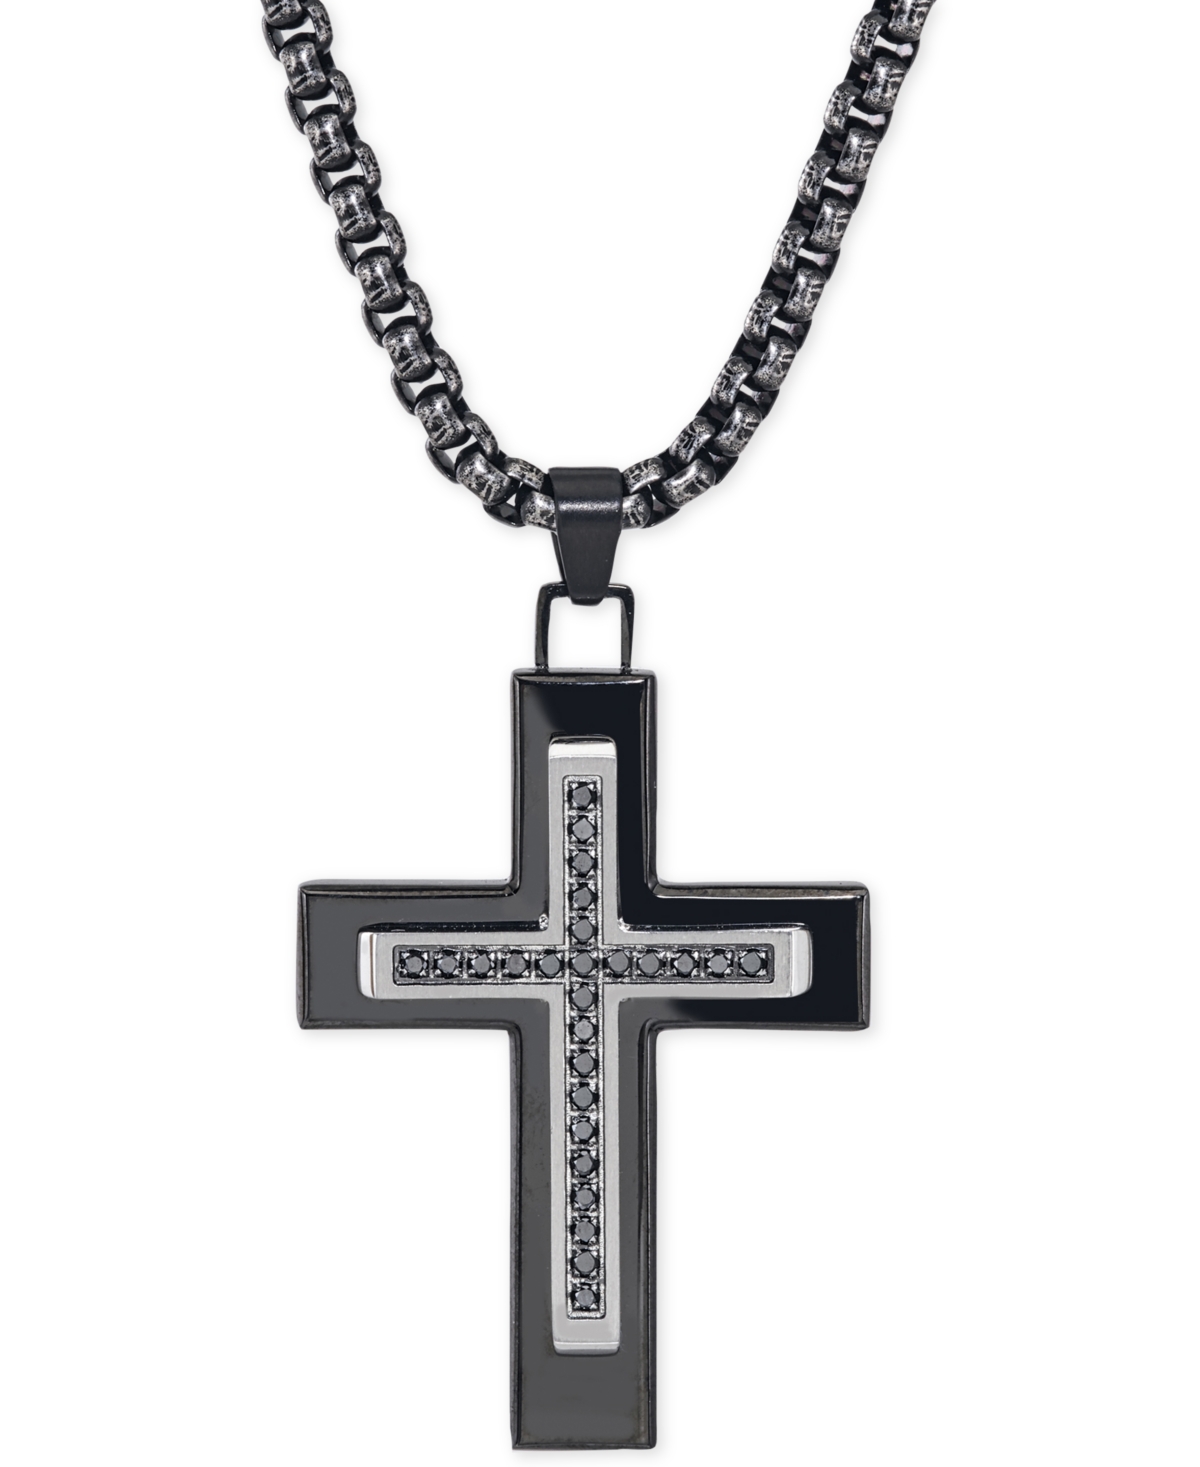 Black Diamond (1/4 ct. t.w.) Cross Necklace in Black Ip over Stainless Steel, Created for Macy's - Black